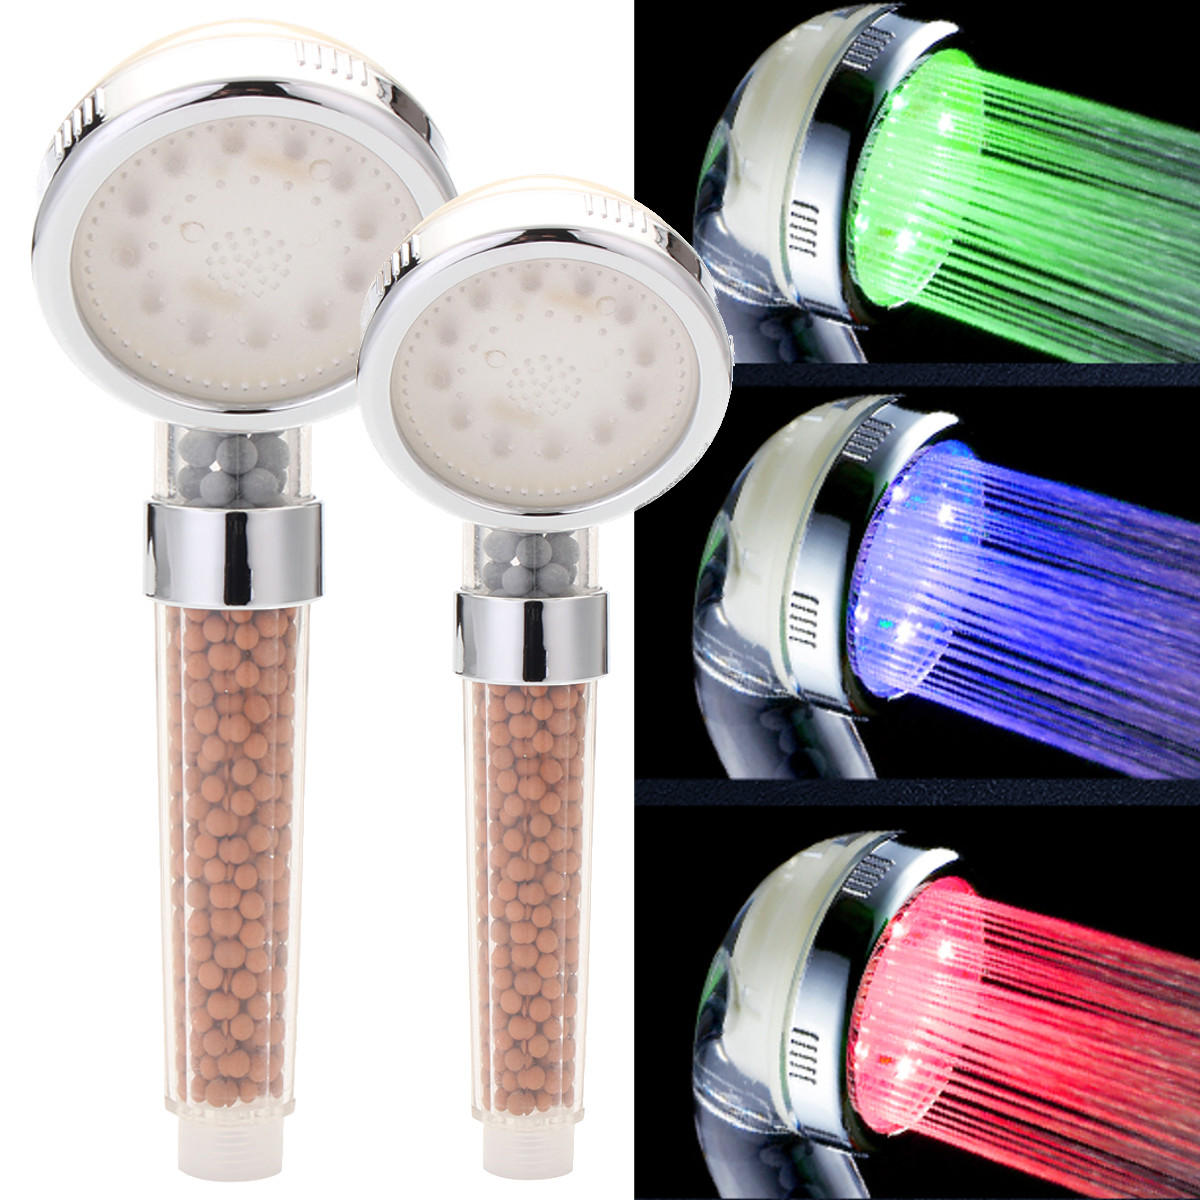 3 Colors Changing LED Light Shower Head Handheld Boosting Filtration Water Head 